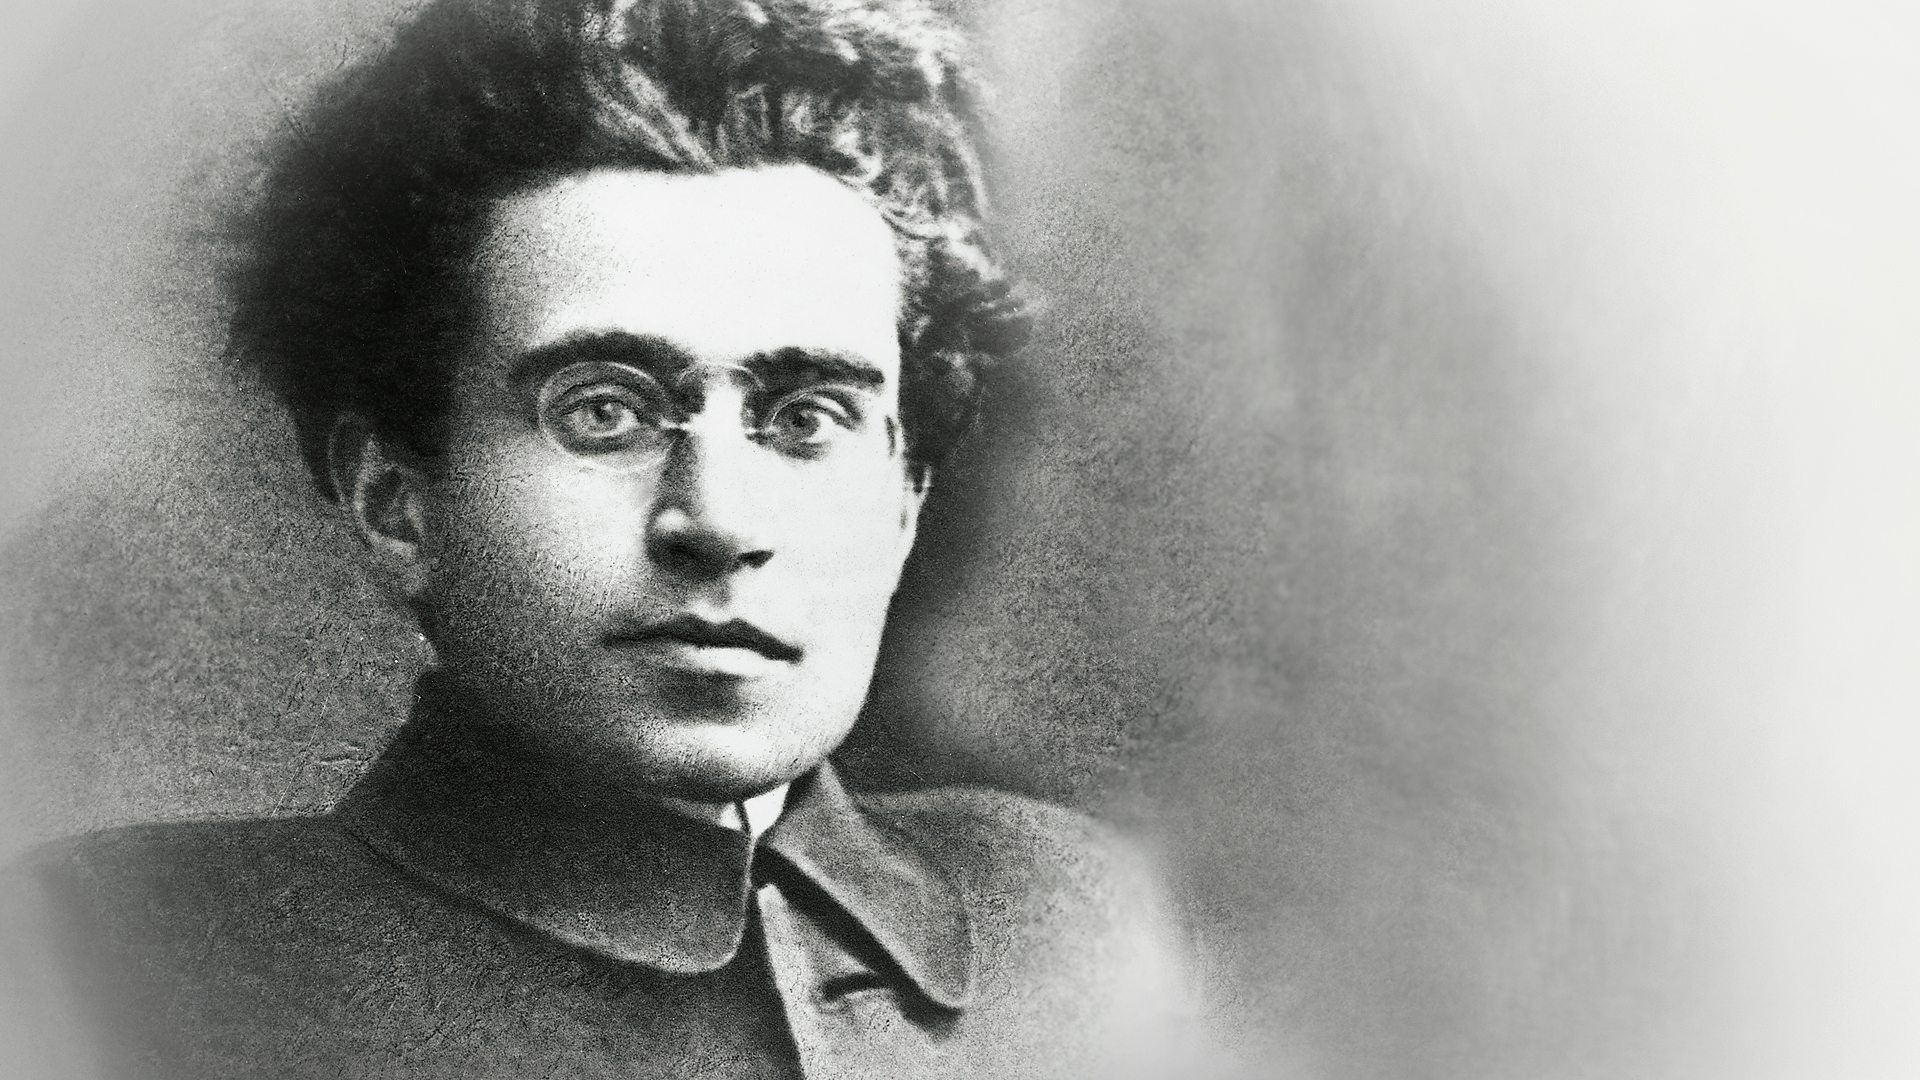 Antonio Gramsci black and white pic in an article for Hegemony in Zimbabwe